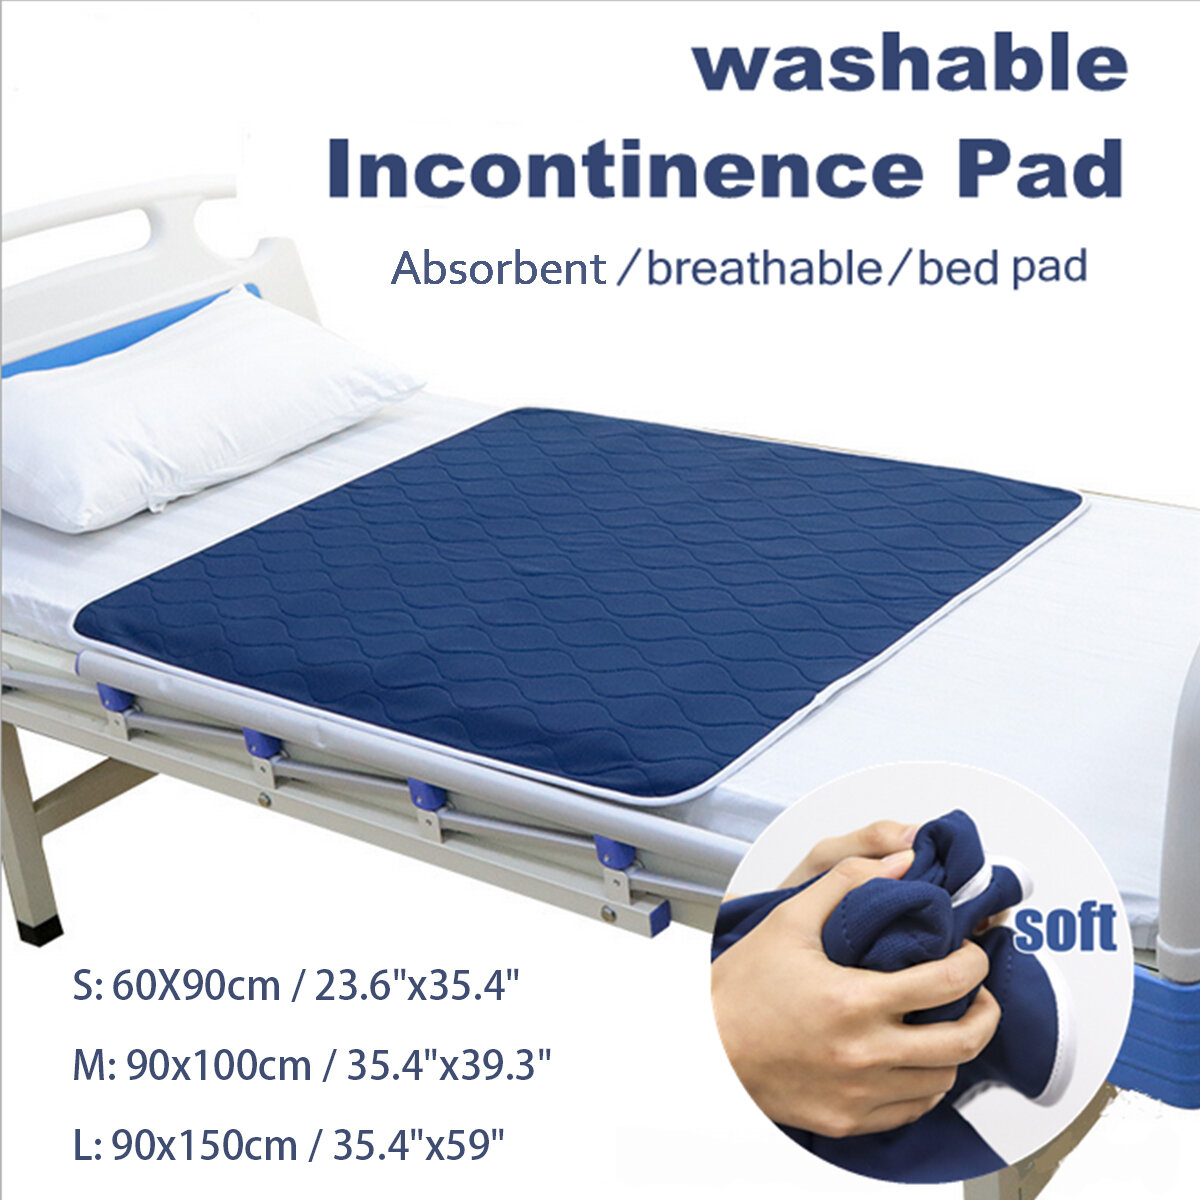 3 Sizes Underpad Washable Absorbent Bed Pad Incontinence Reusable Mattress Protector Underpad Washable For Incontinence